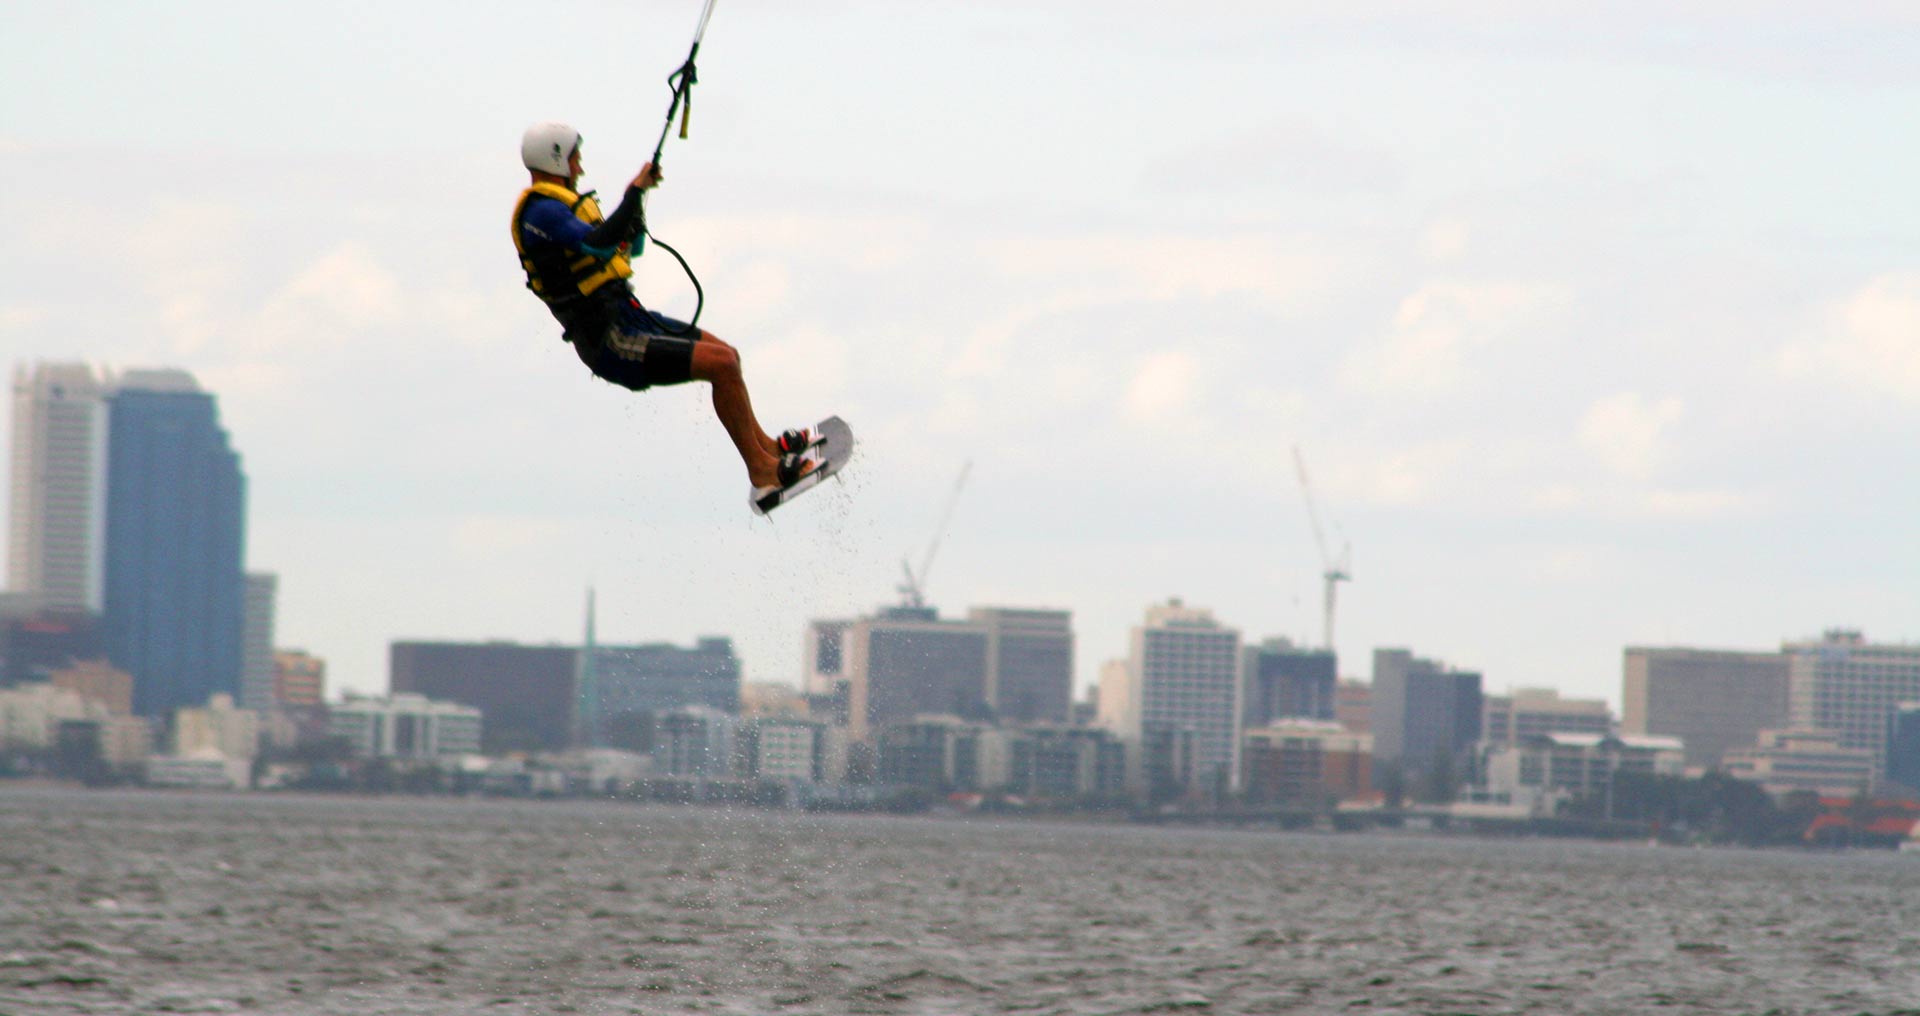 Safety is critical for kitesurfing